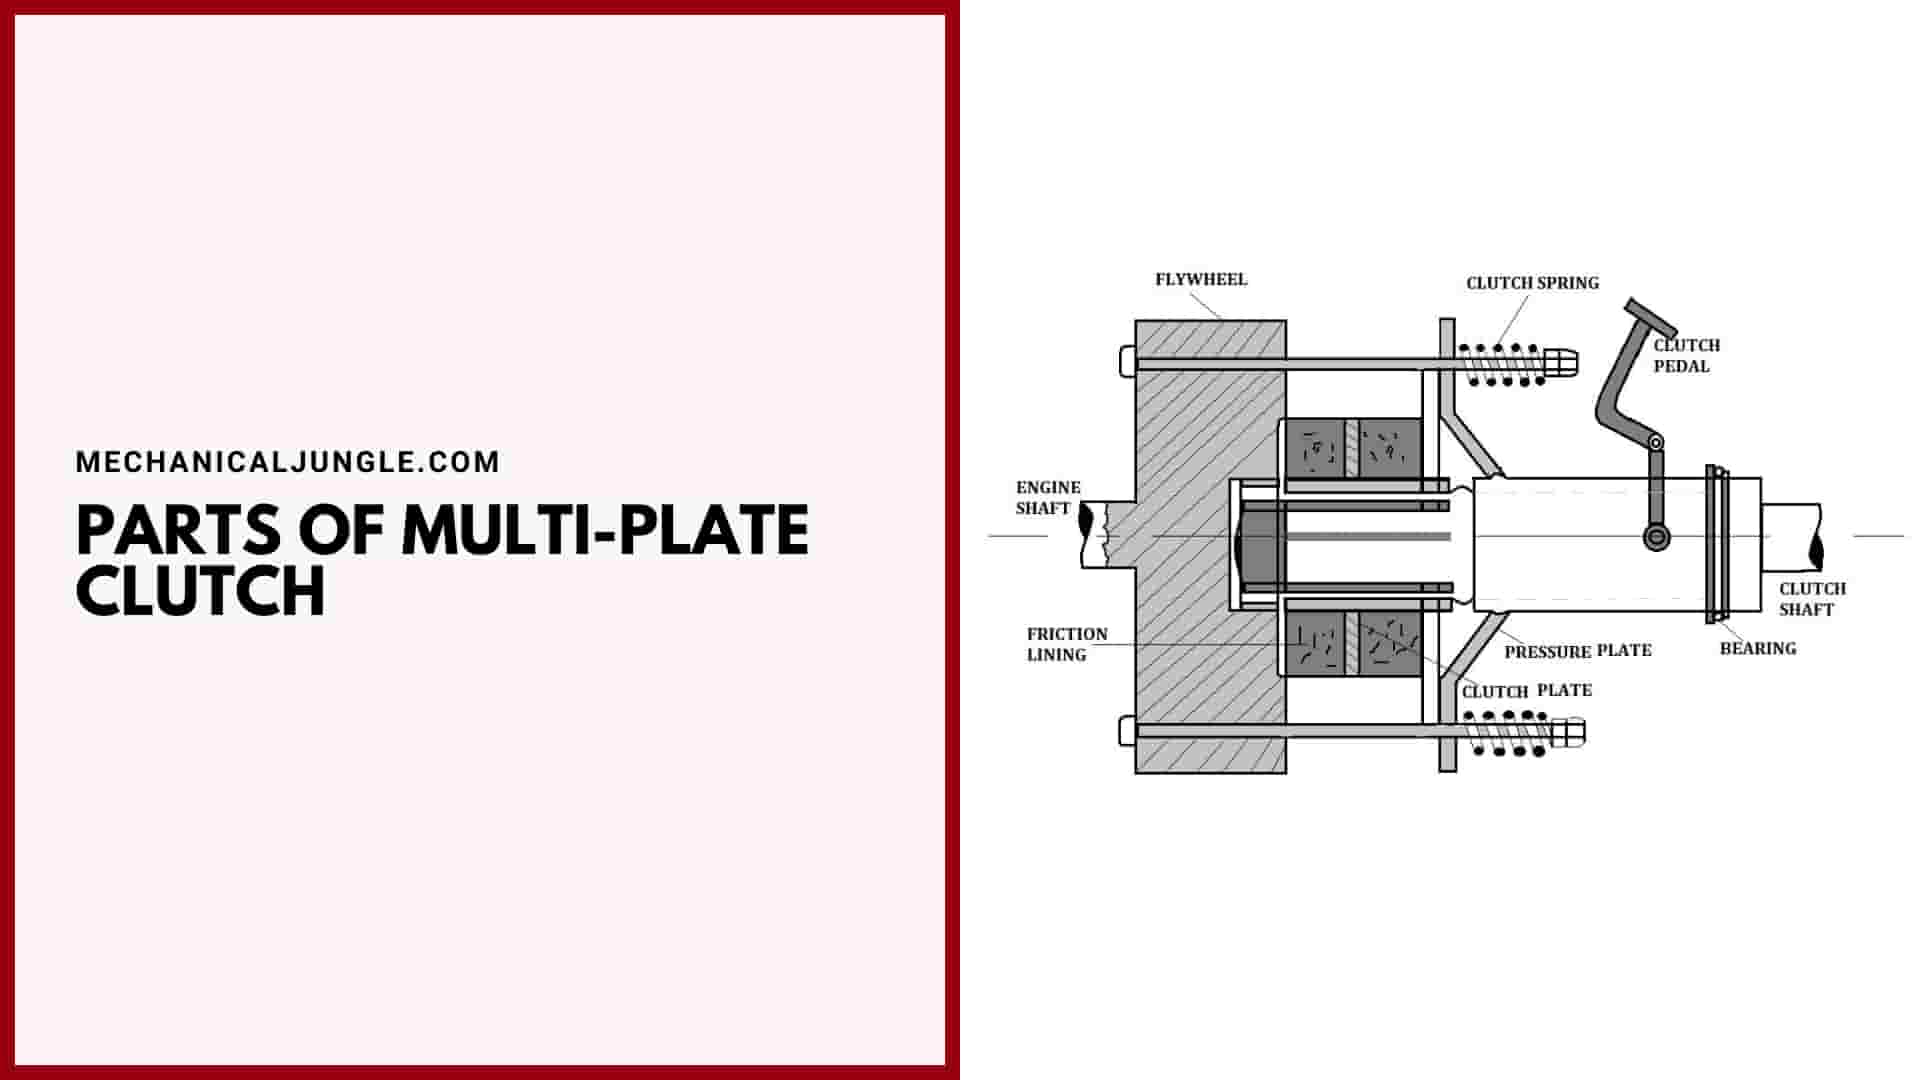 Parts of Multi-Plate Clutch